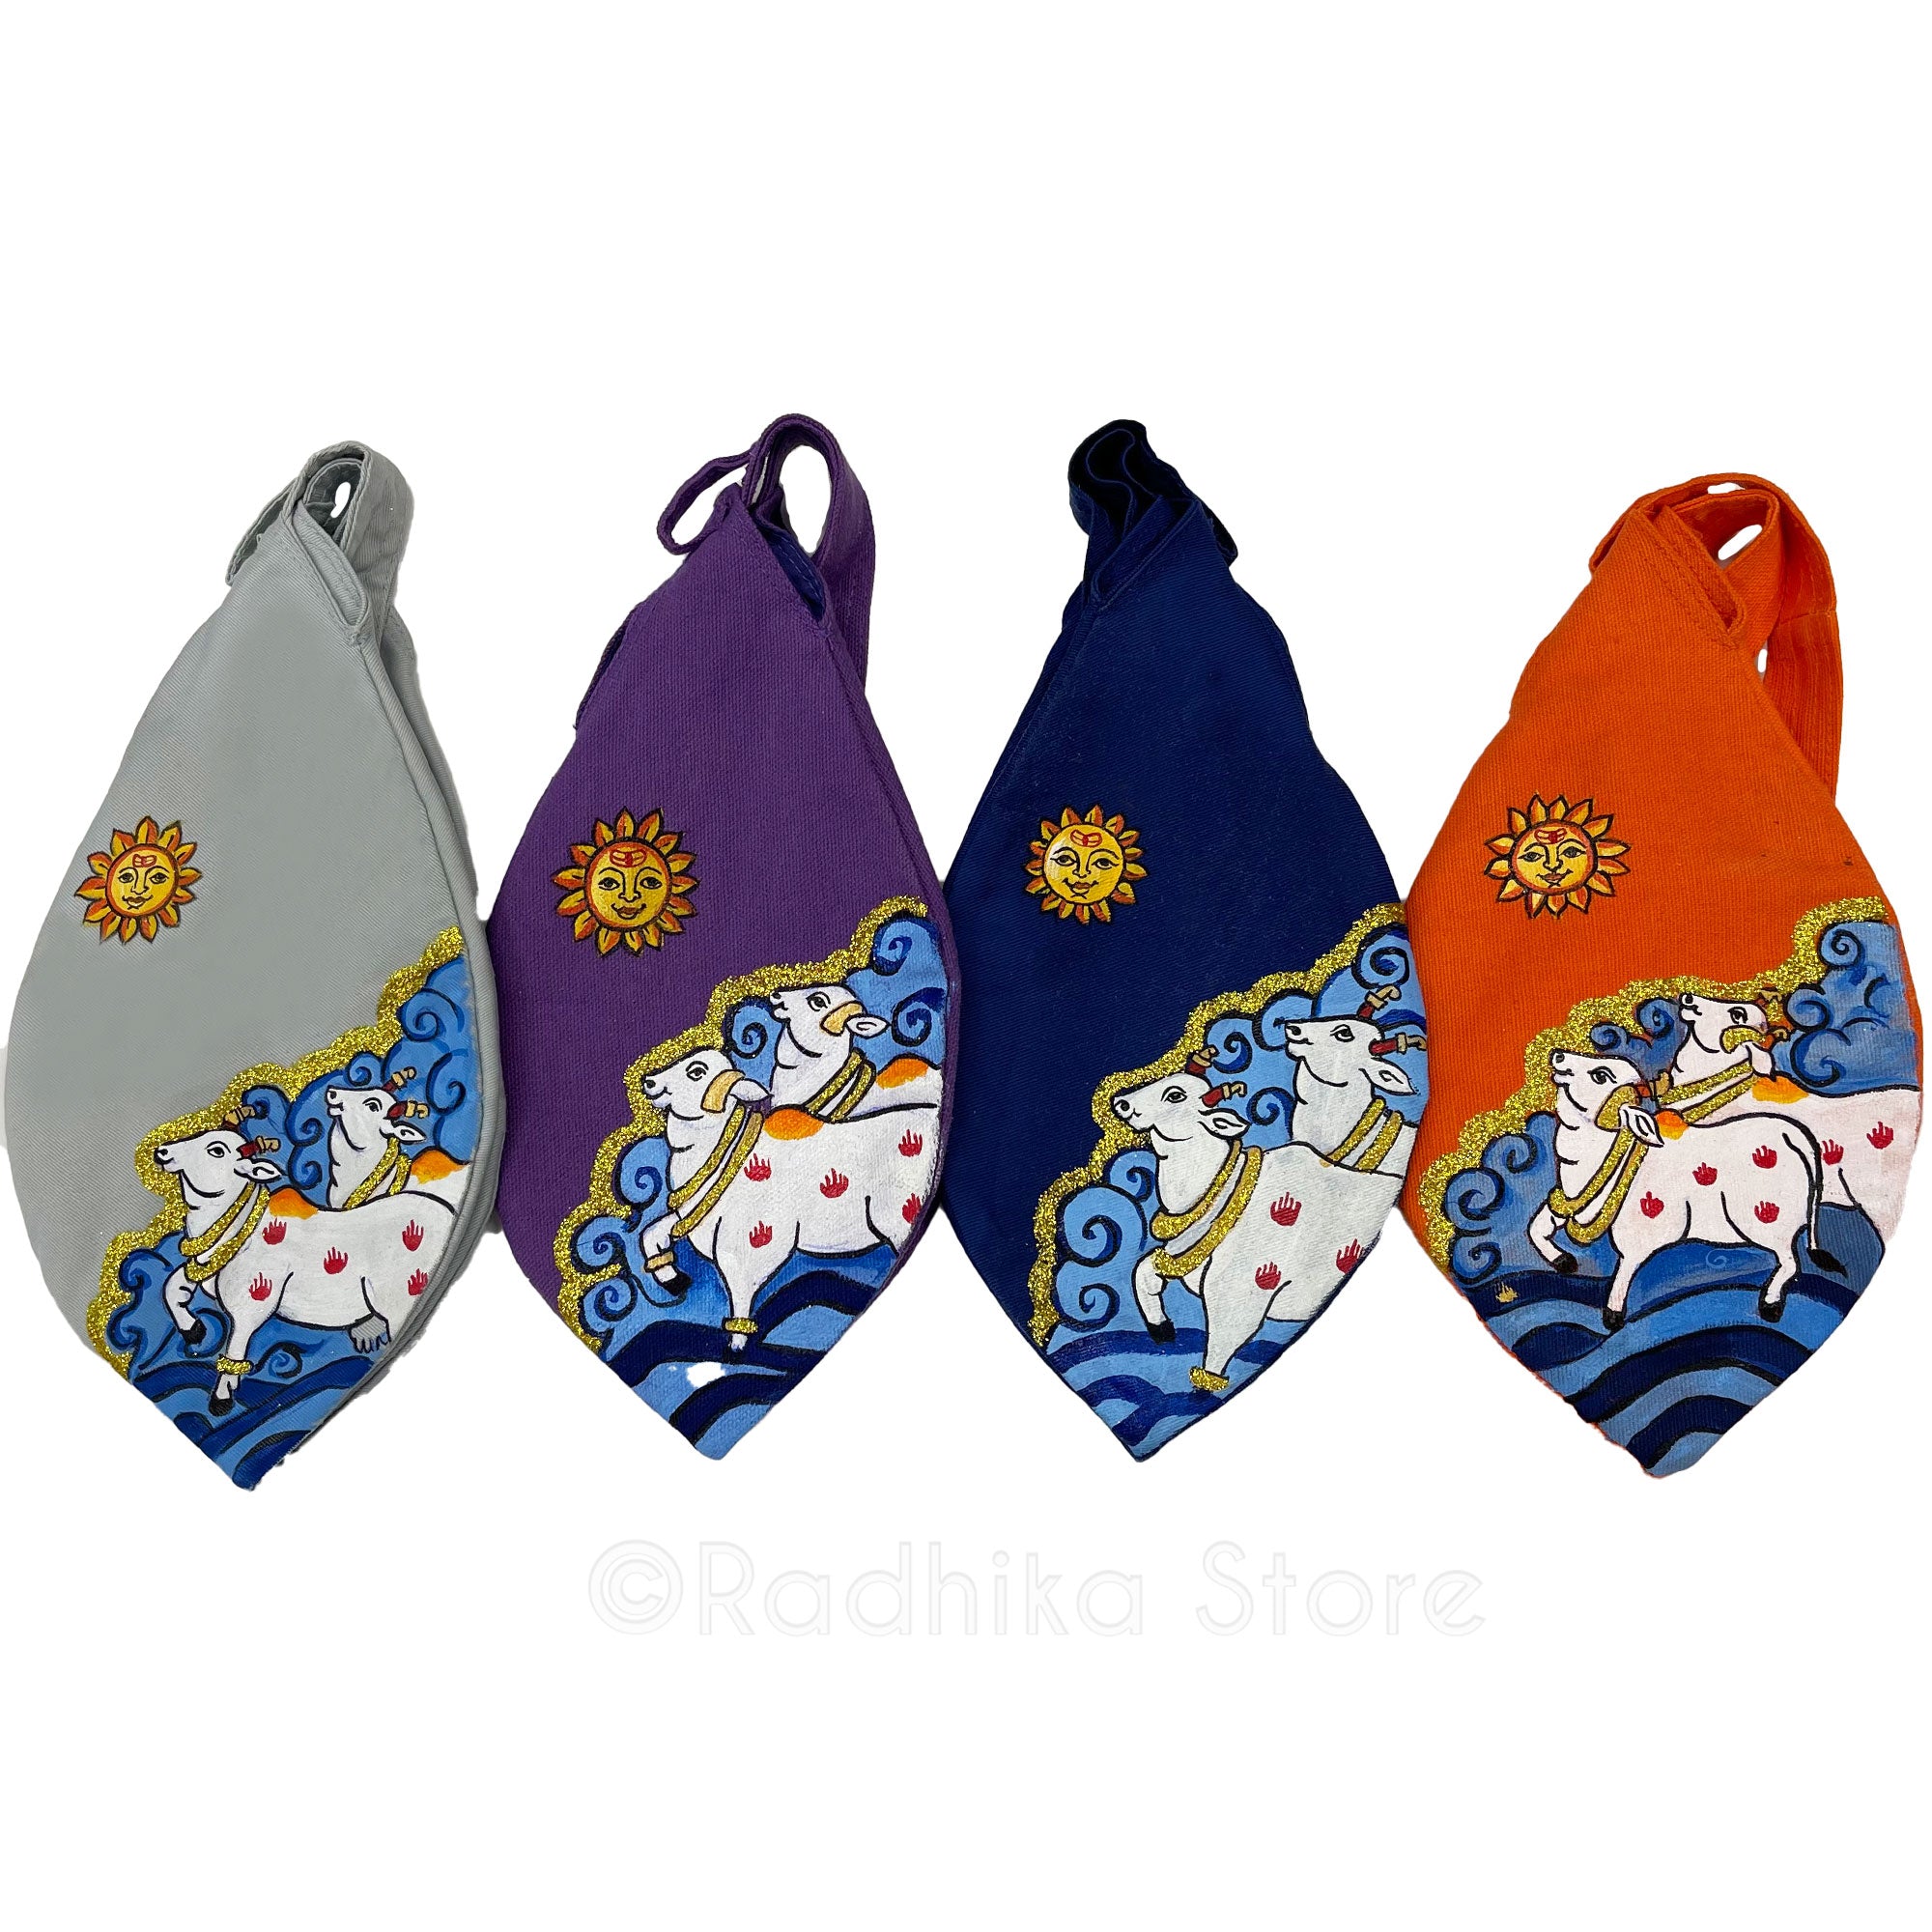 Surabhi Cows in Yamuna - Thick Cotton - Hand Painted Bead Bag- Choose Color